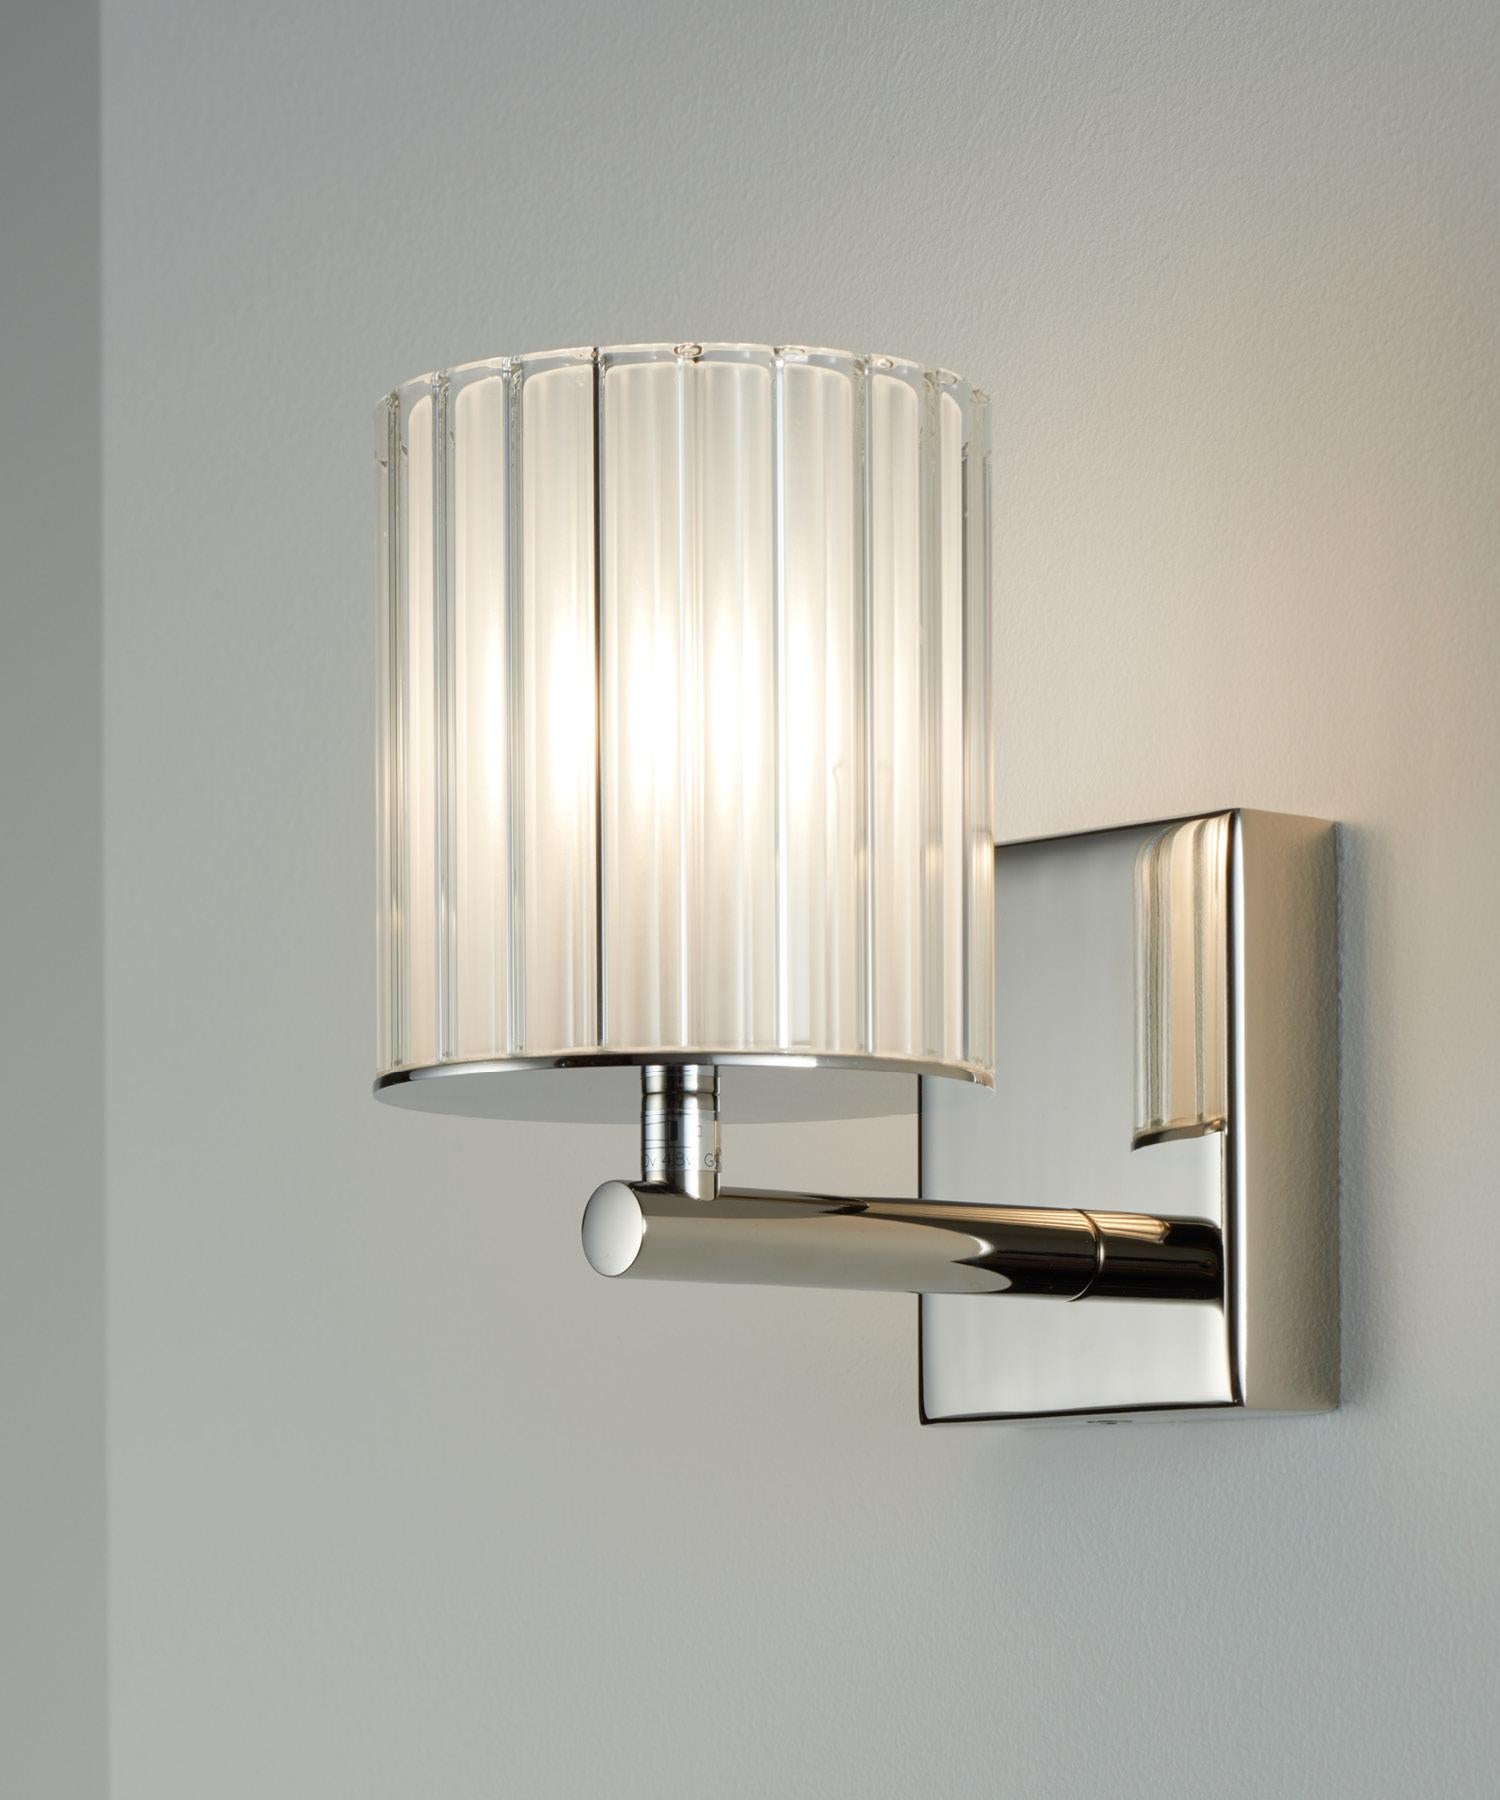 British Flute Wall Light in Polished Nickel with Frosted Glass Diffuser, UL Listed For Sale